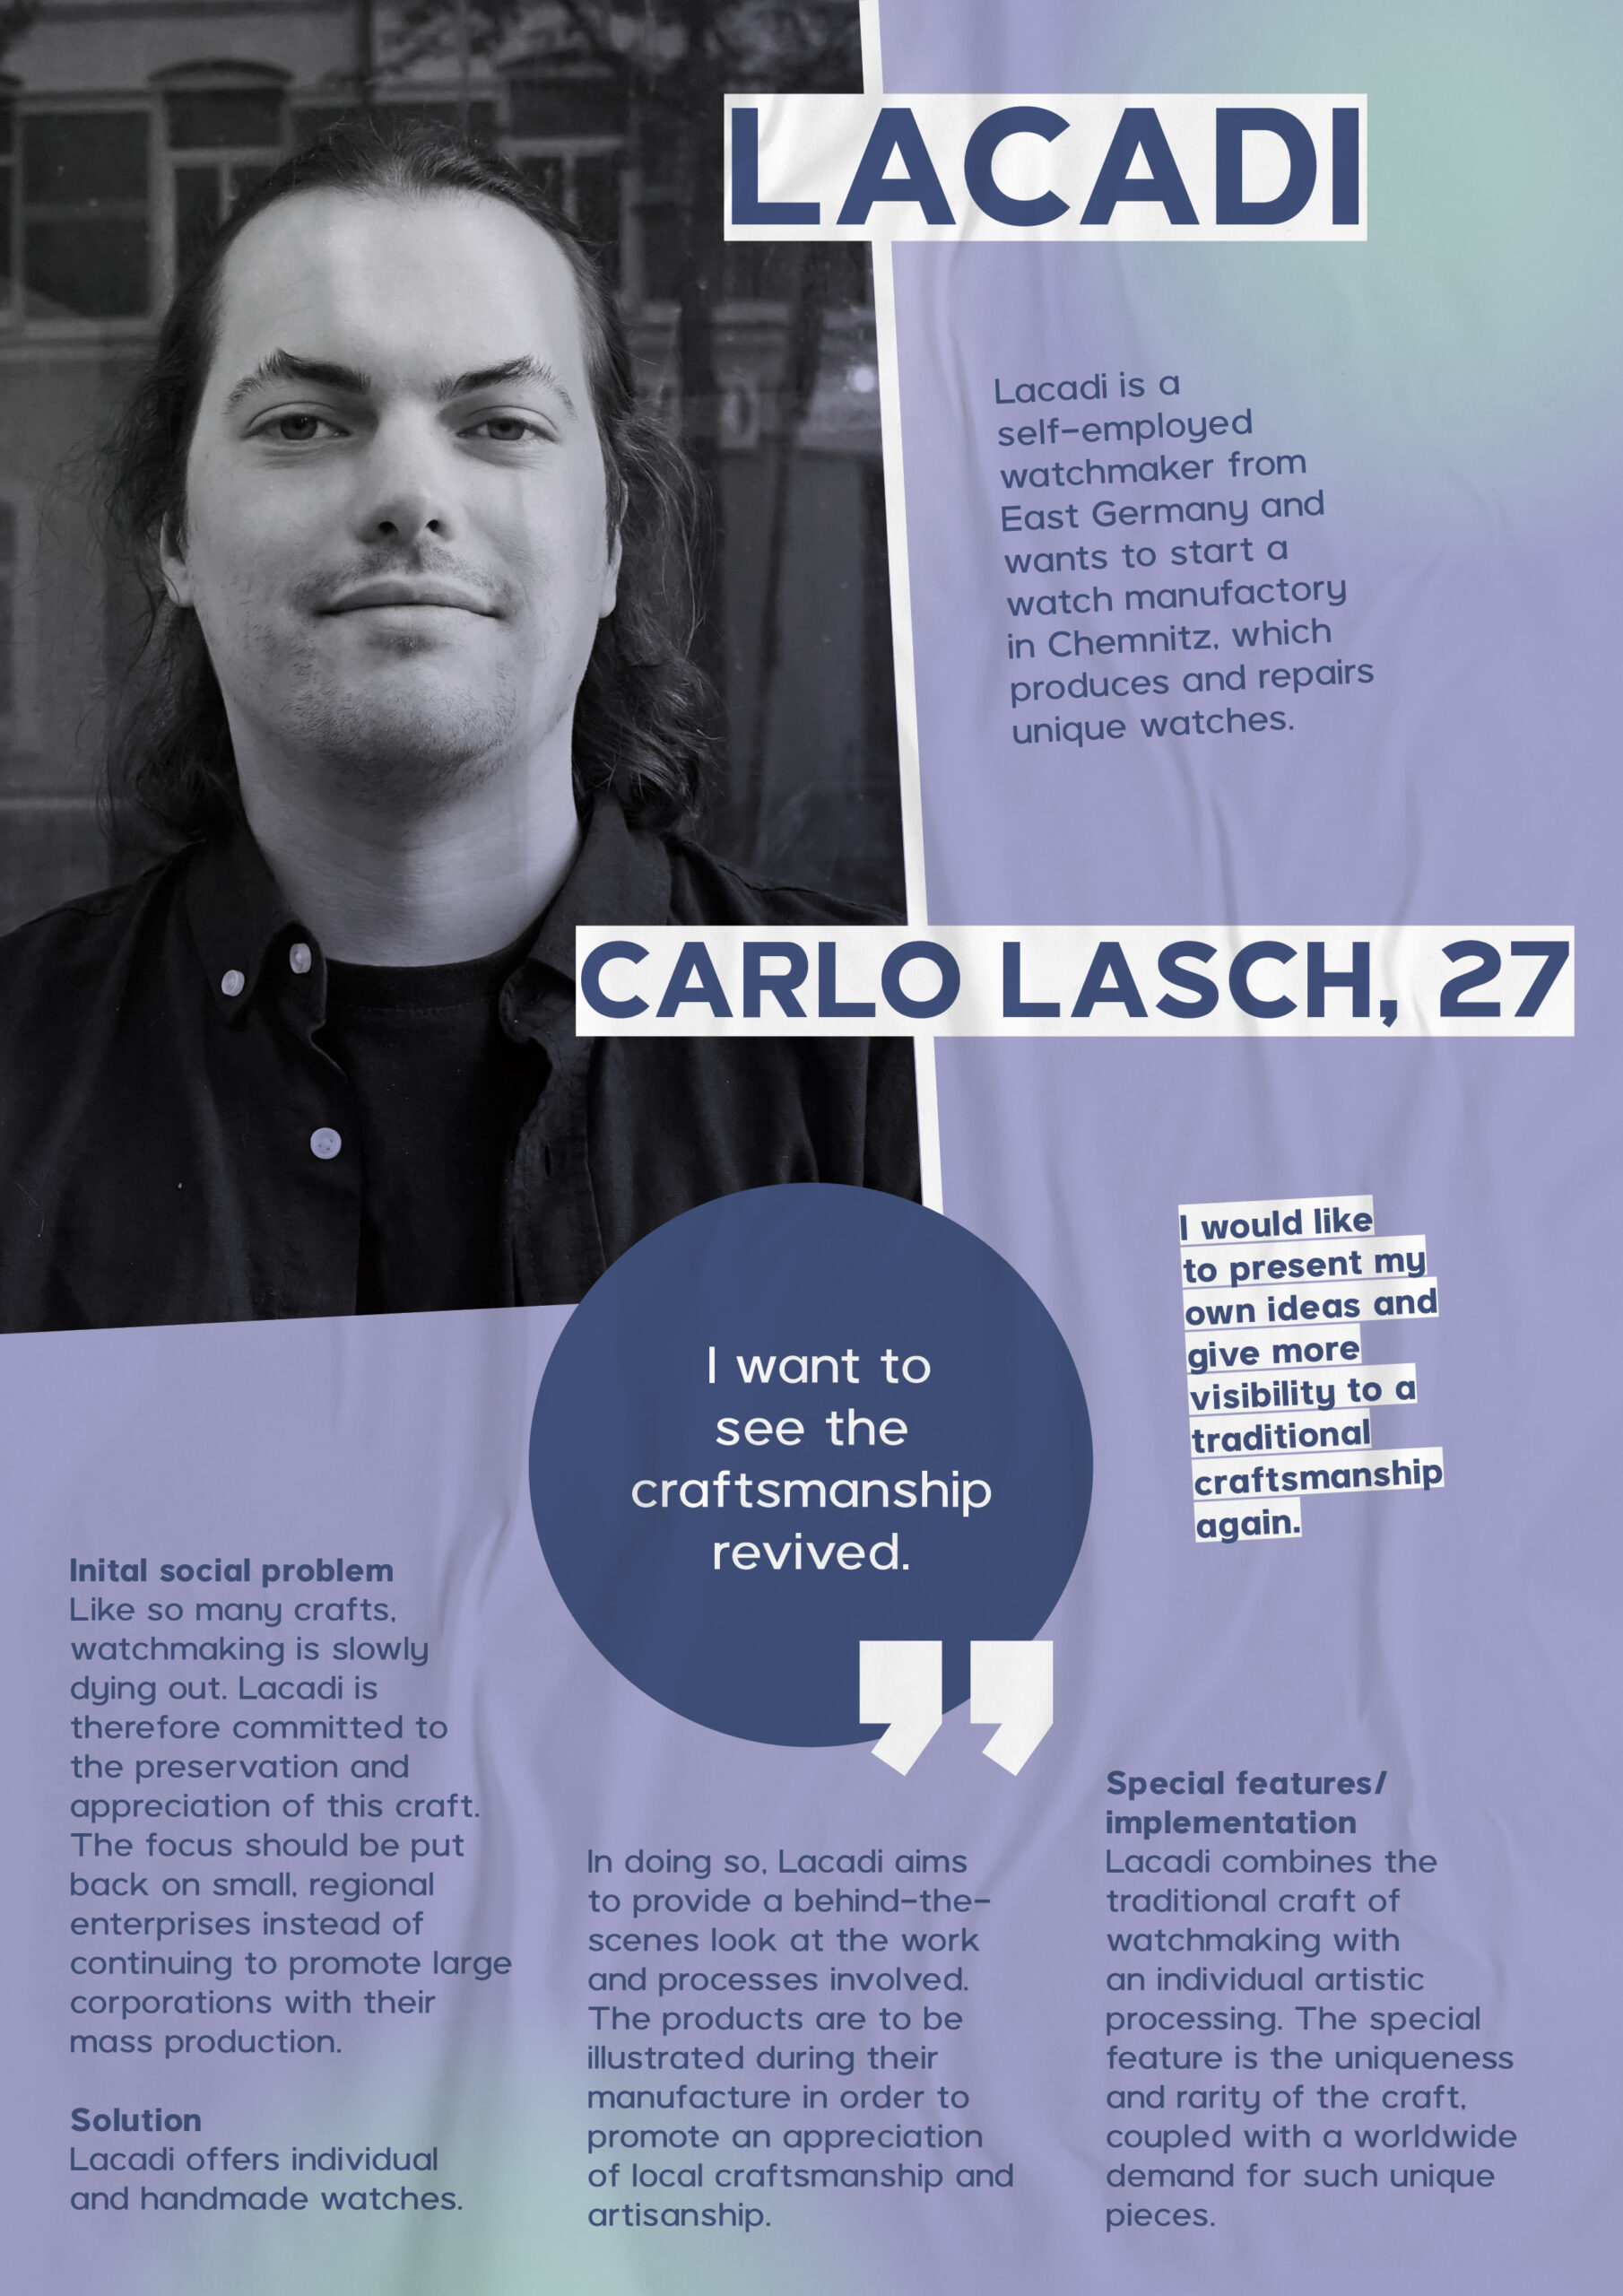 Carlo Lasch, 27, is a self-employed watchmaker and wants to found a watch manufactory in Chemnitz with Lacadi.